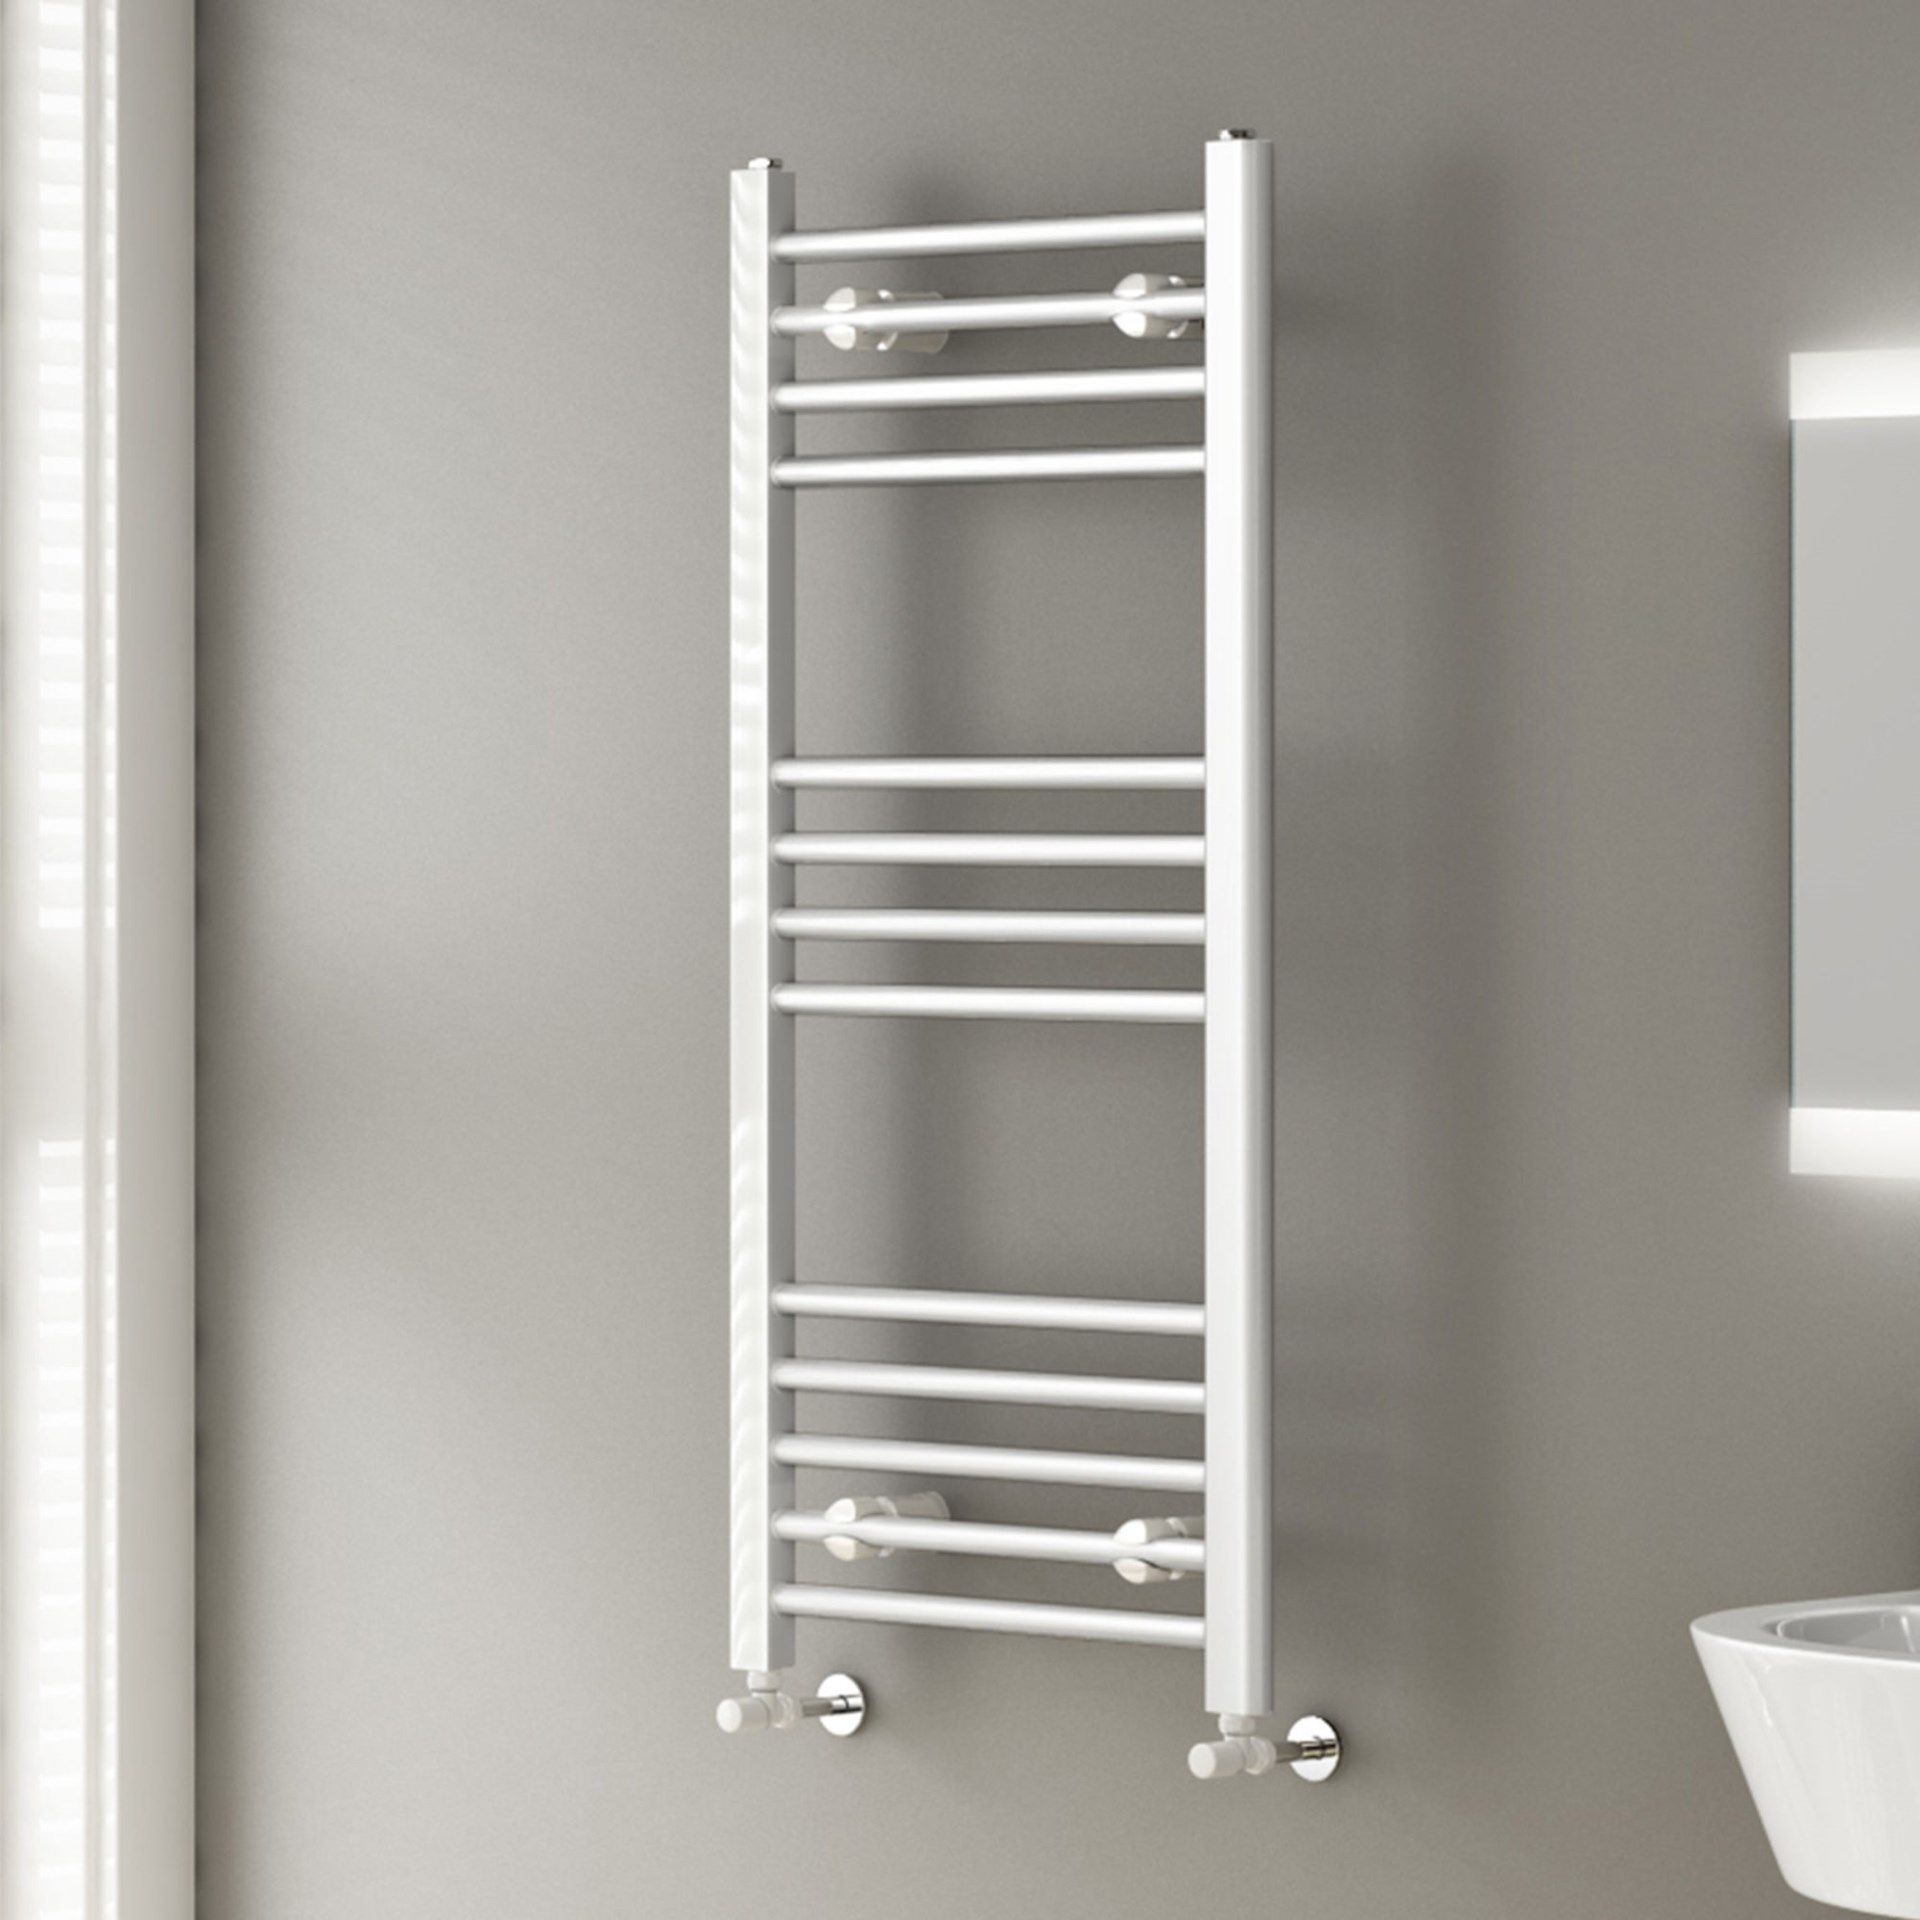 (VD161) 1100x500mm White Basic Towel radiator High gloss White.RRP £165.99.Made from low-carbo...